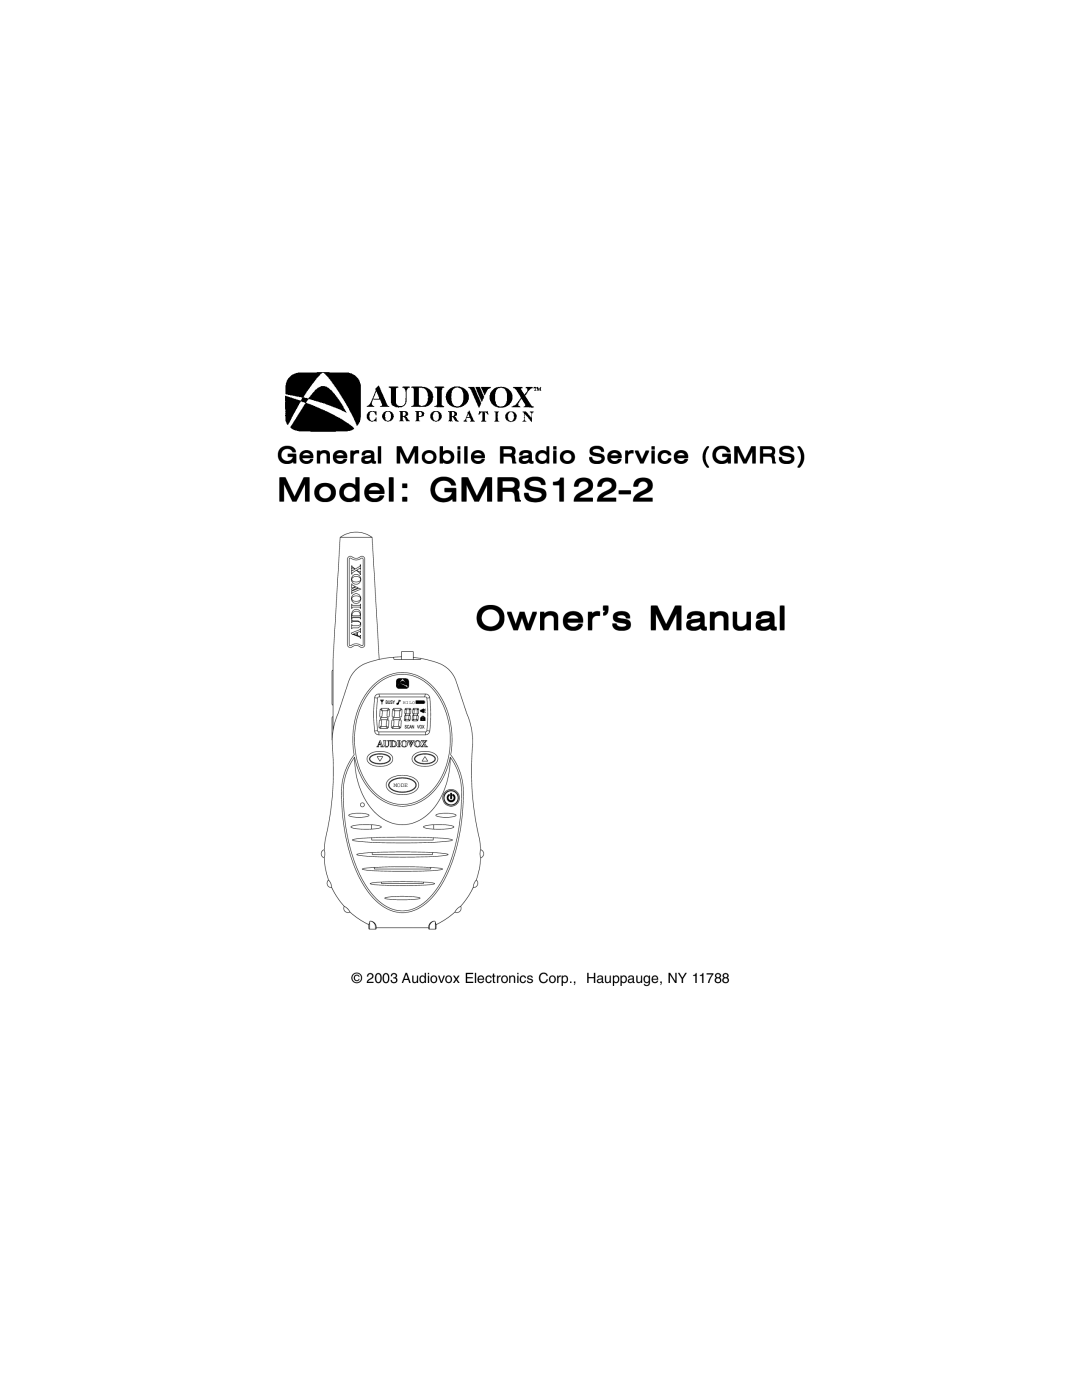 Audiovox manual Model GMRS122-2 